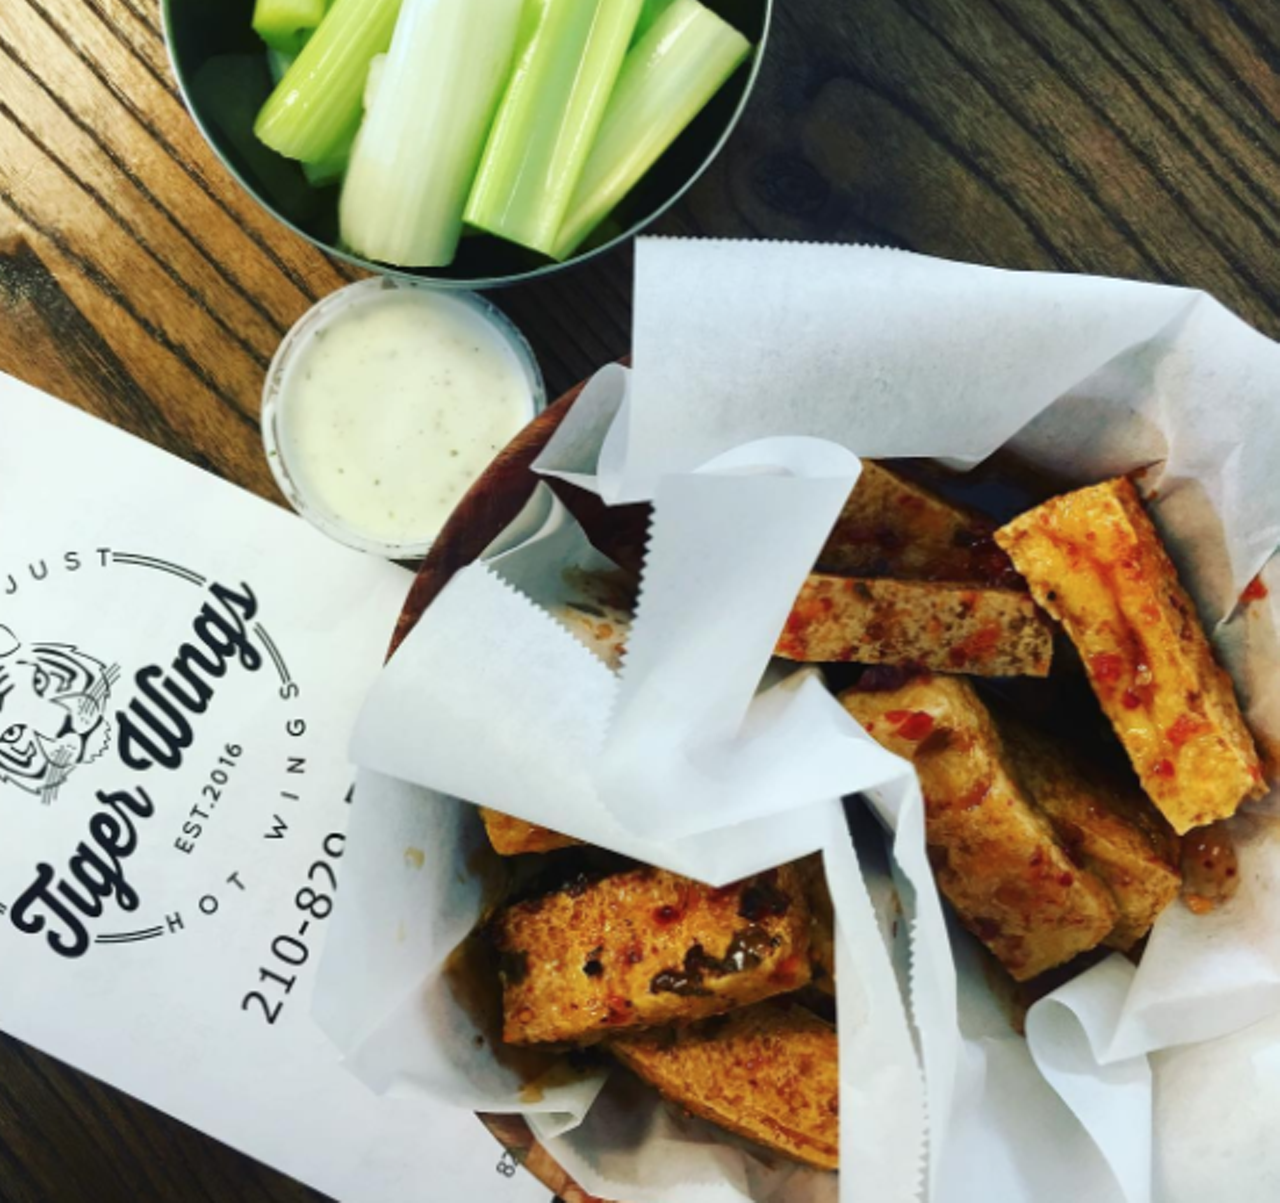 Tiger Wings
8210 Broadway, (210) 829-5000, facebook.com
Don’t feel left out of the game-watch party! Order up your very own basket of tofu wings to cheer on the Spurs. Available in a delicious mango flavor for the perfect meal.
Photo via Instagram, rebelmariposa